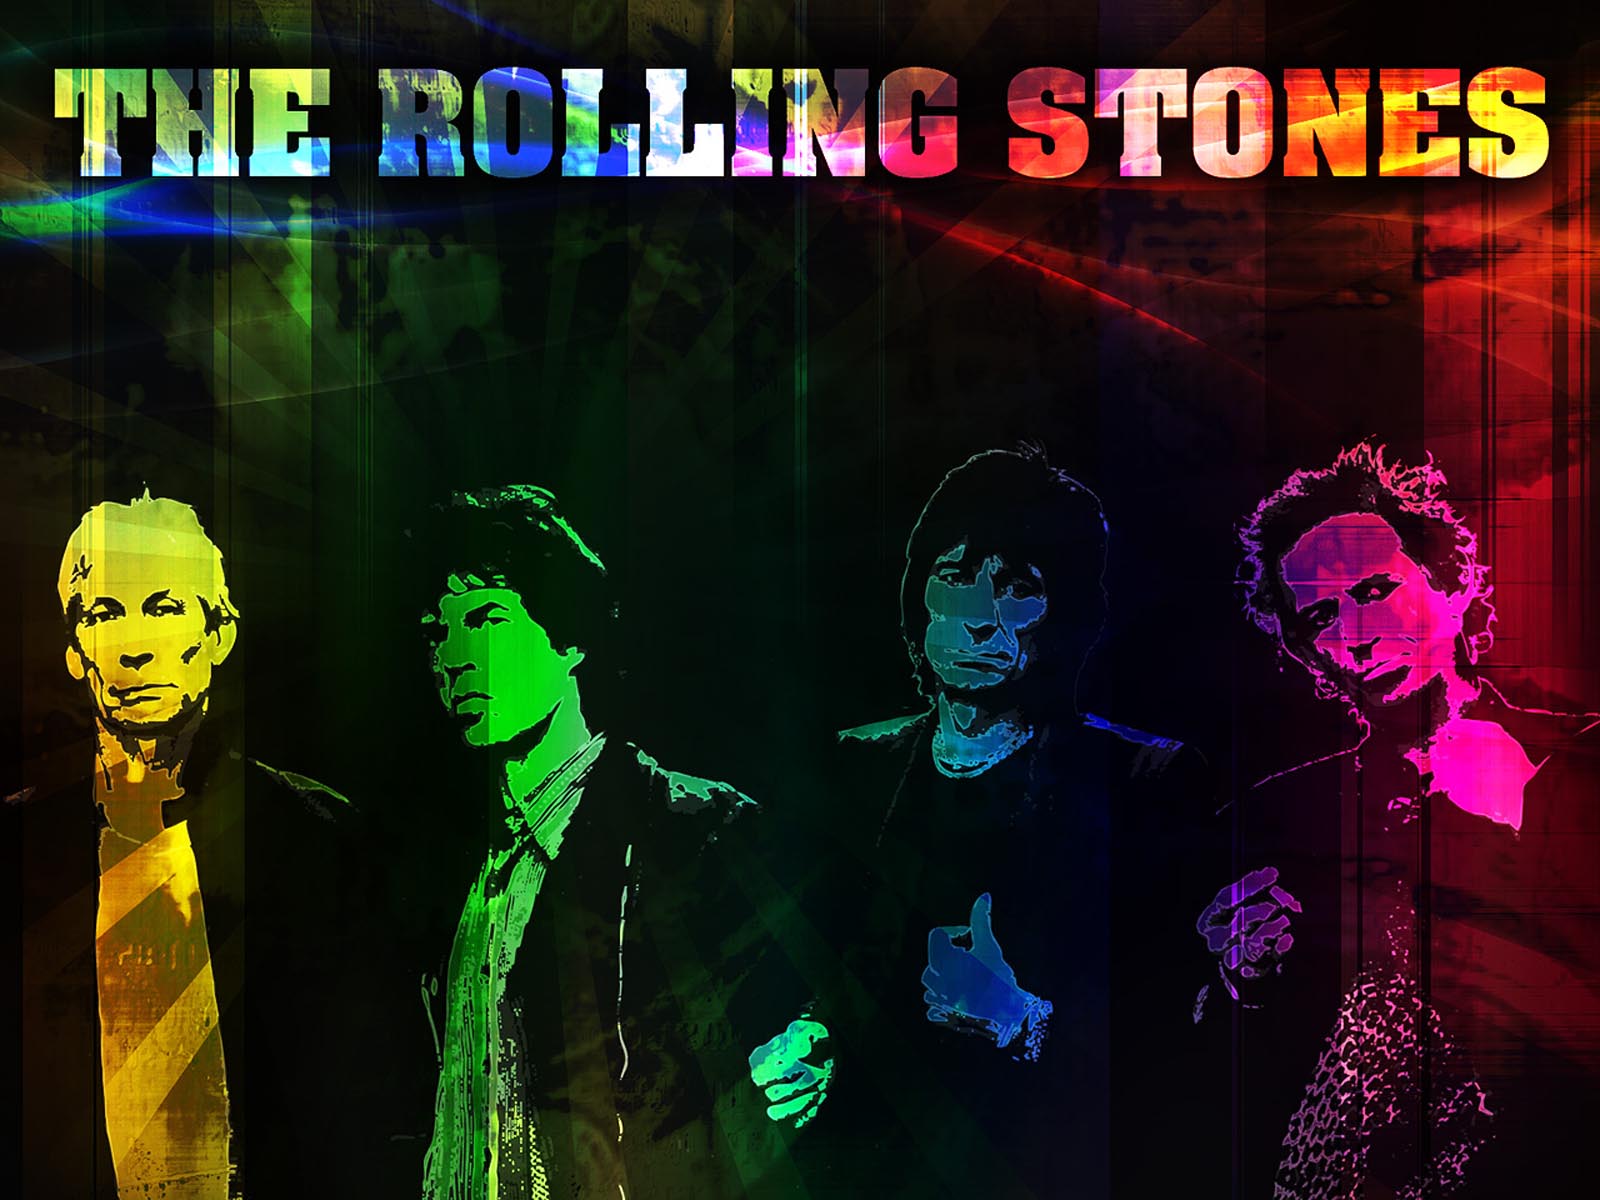  WallpapersThe Rolling Stones Wallpapers Pictures Free Download